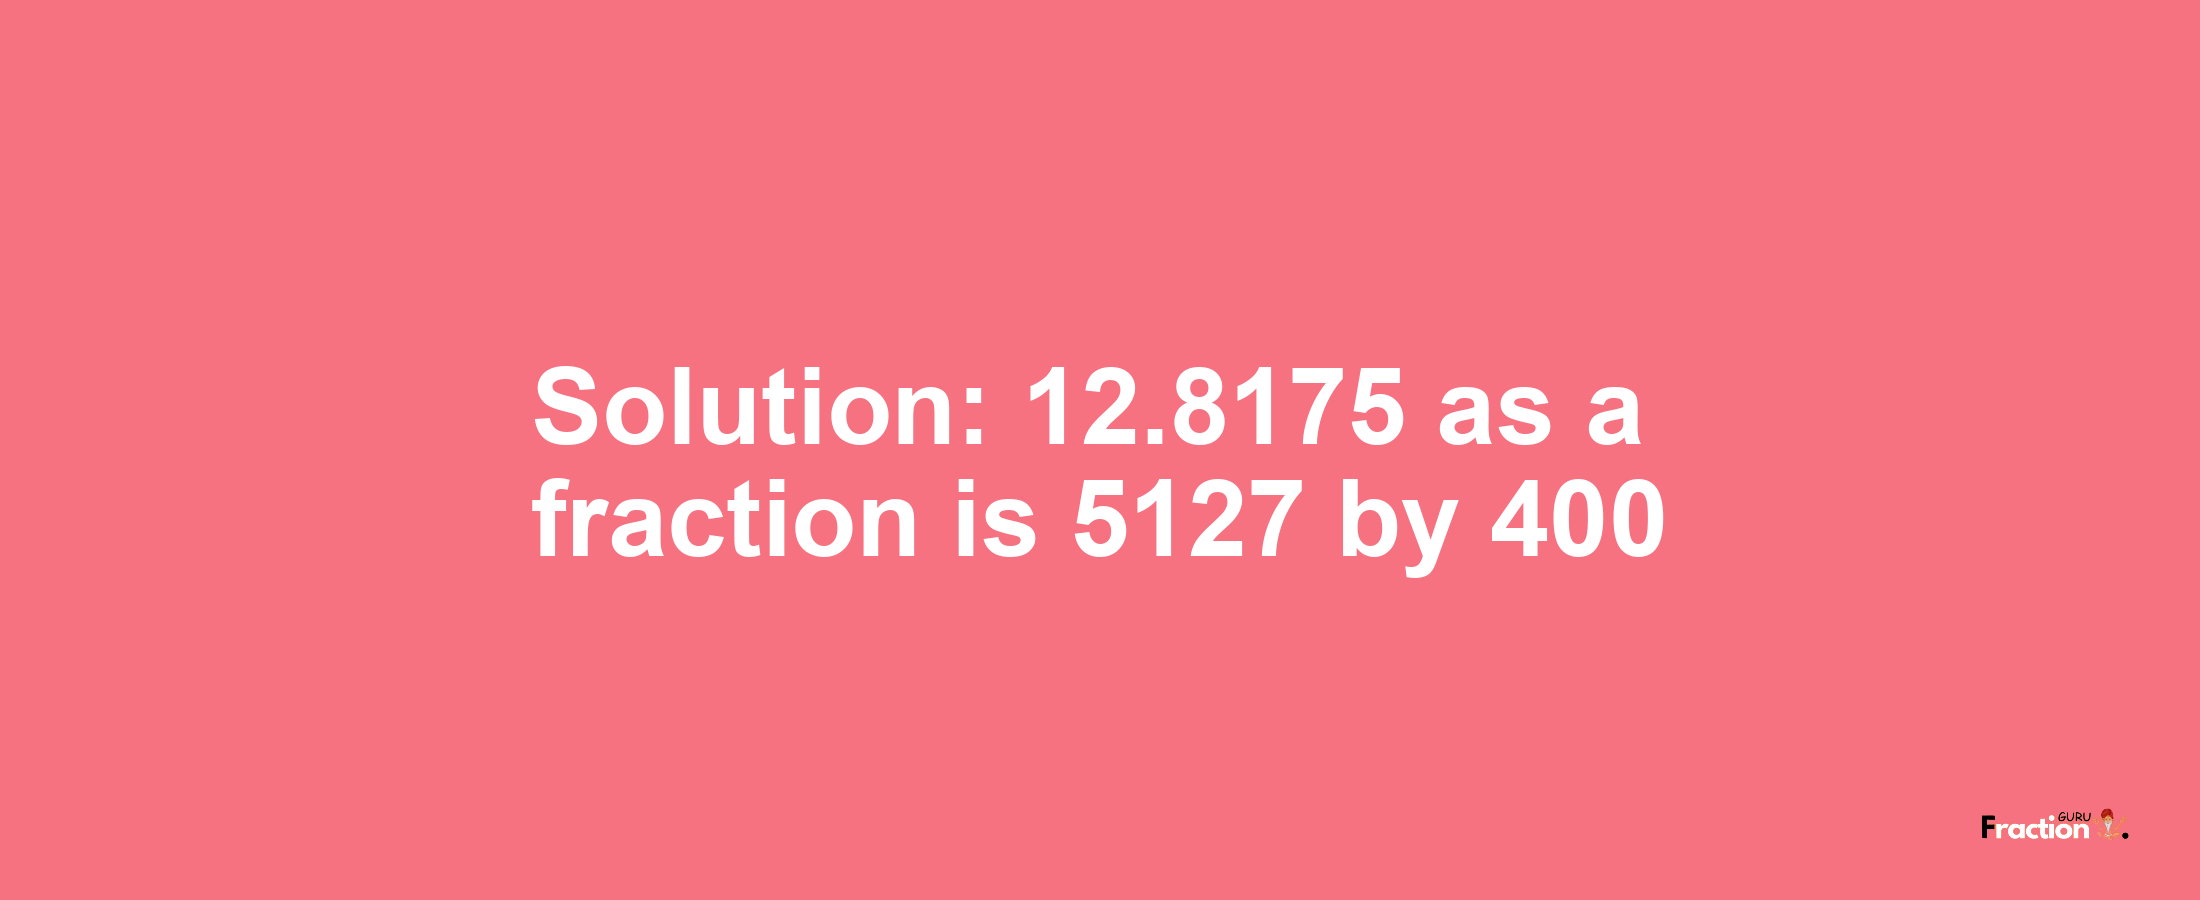 Solution:12.8175 as a fraction is 5127/400